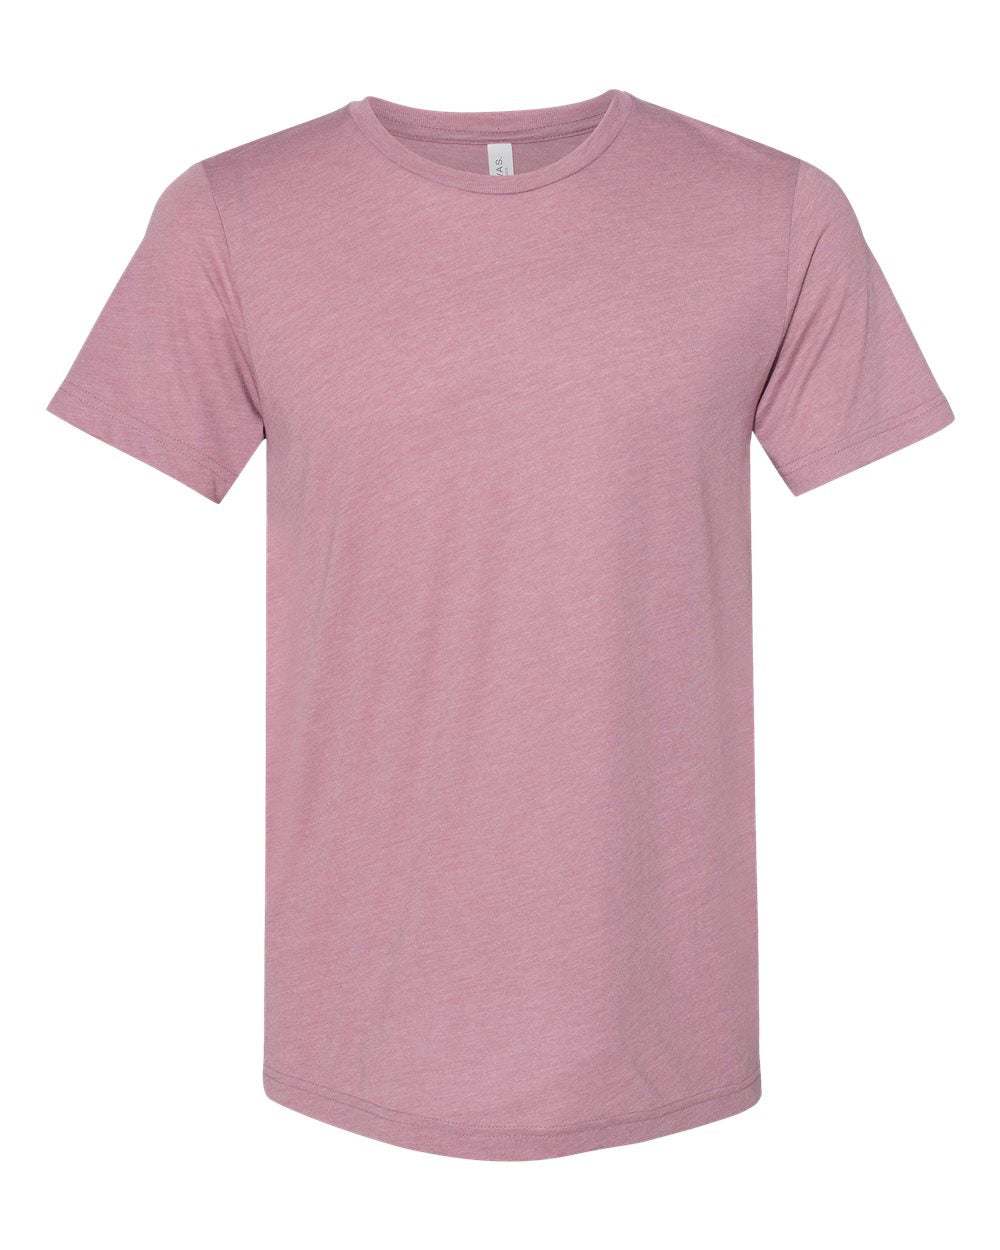 Bella + Canvas Triblend Tee (3413) in Orchid Triblend